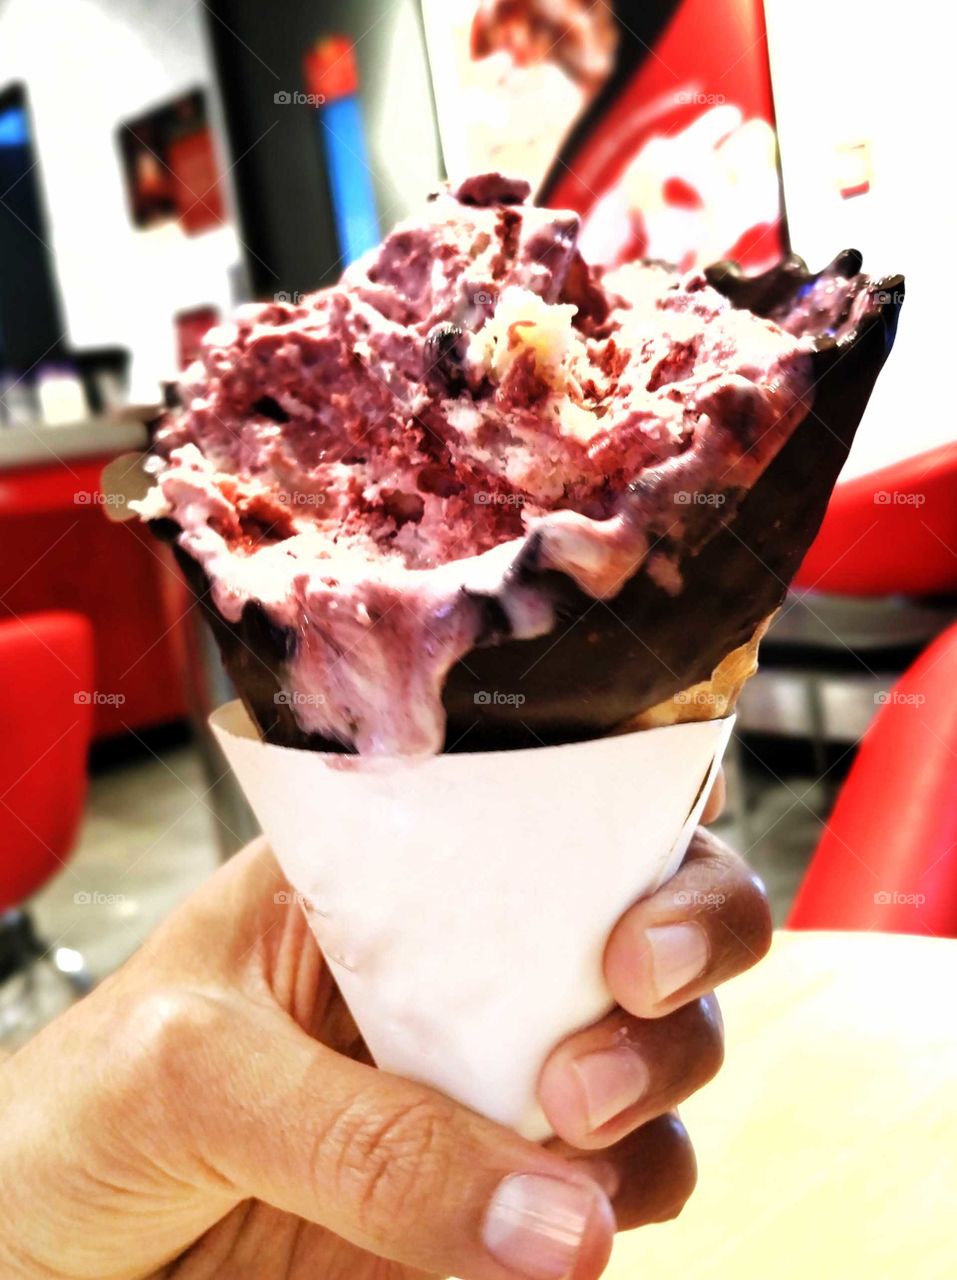 An ice cream I can die for. Pune Maharashtra India. Dated 25th November 2018. Instagram: shafiggue.k